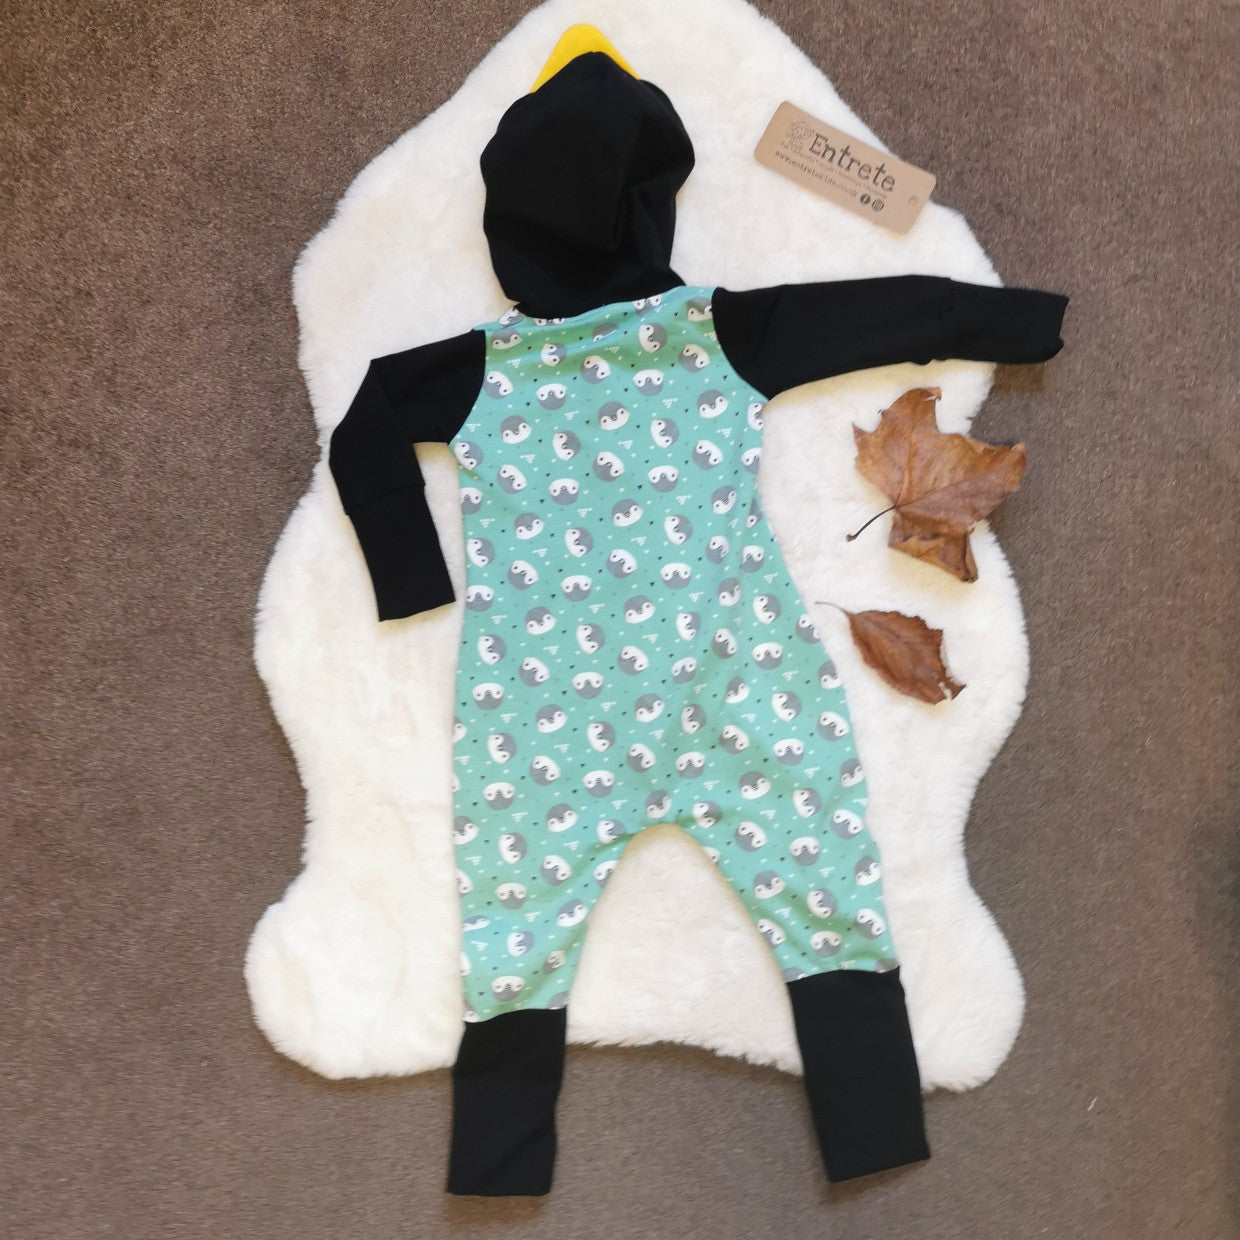 Rear of the ethical, fun and adorable penguin romper. Handmade using mint penguins, black and yellow organic cotton jerseys', with a natural bamboo hood lining. 